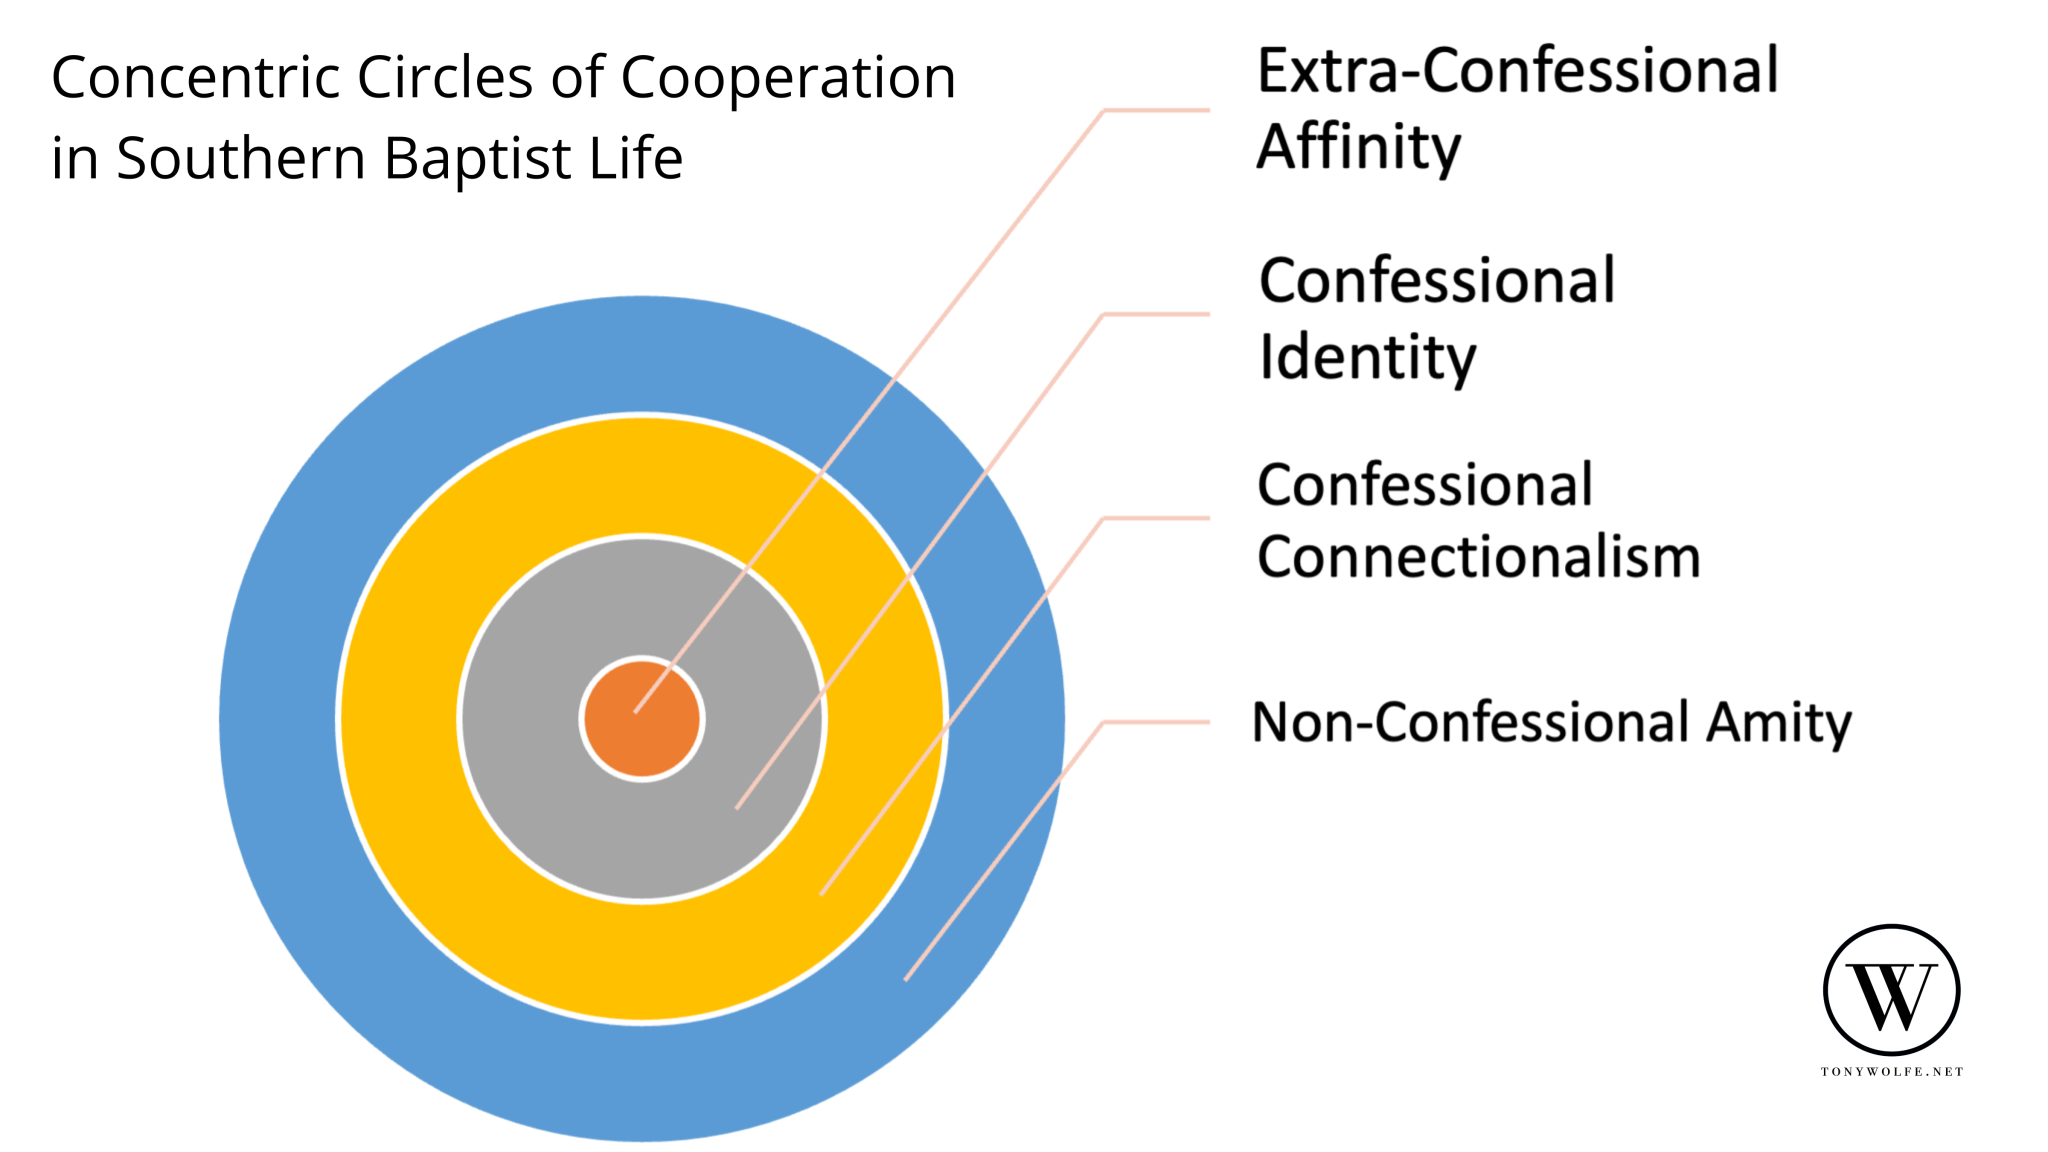 Concentric-Circles-of-Cooperation-in-Southern-Baptist-Life-2